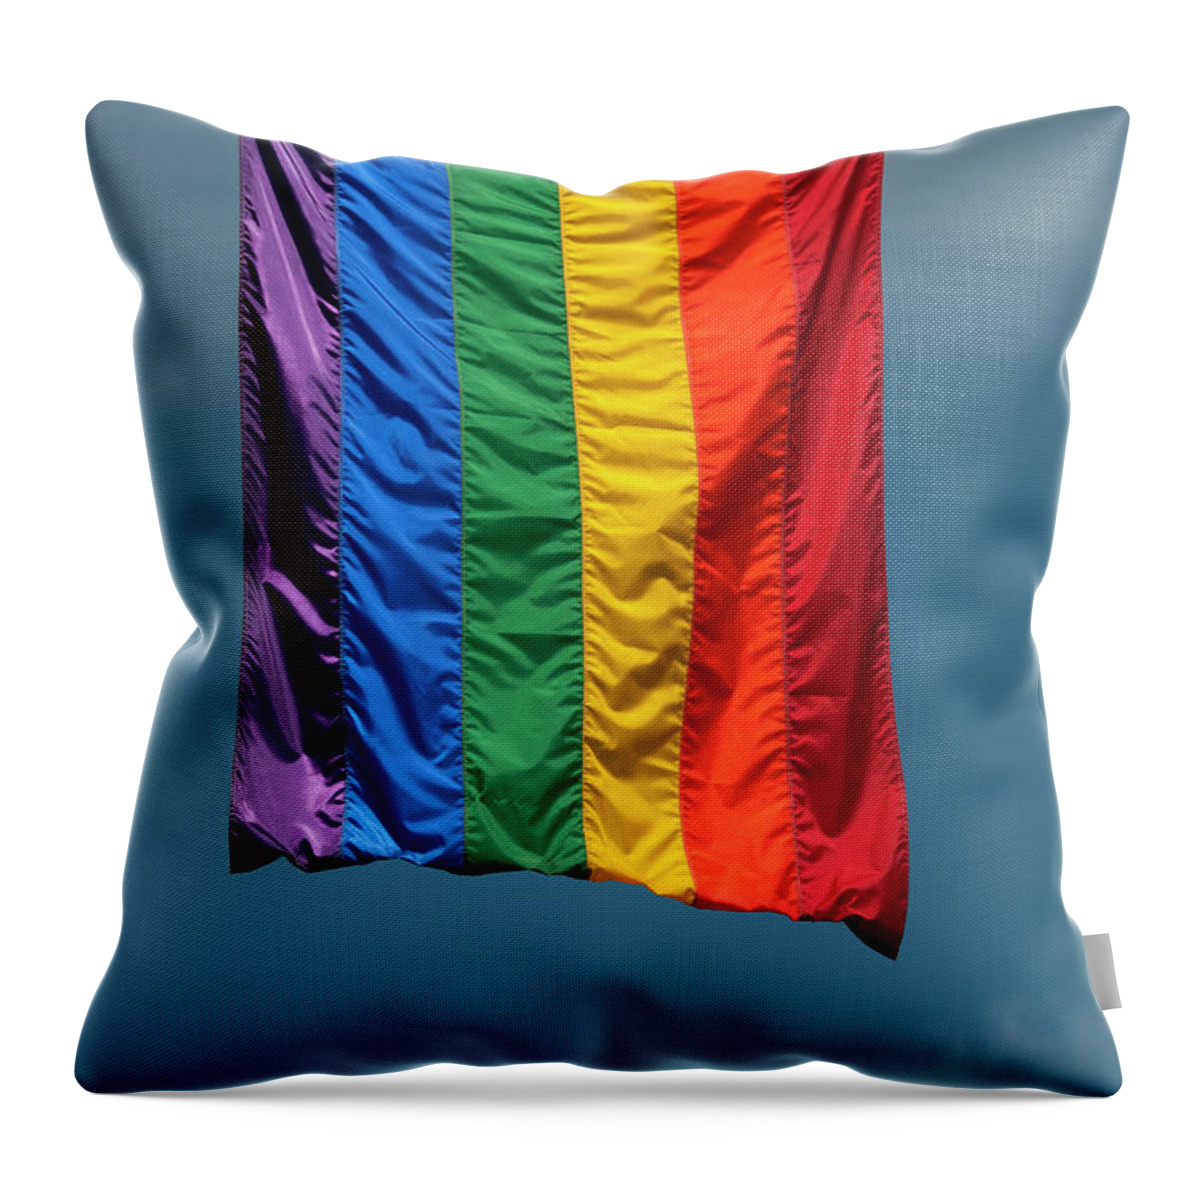 Lgbt Movement Throw Pillow featuring the photograph LGBT Flag by Phil Cardamone